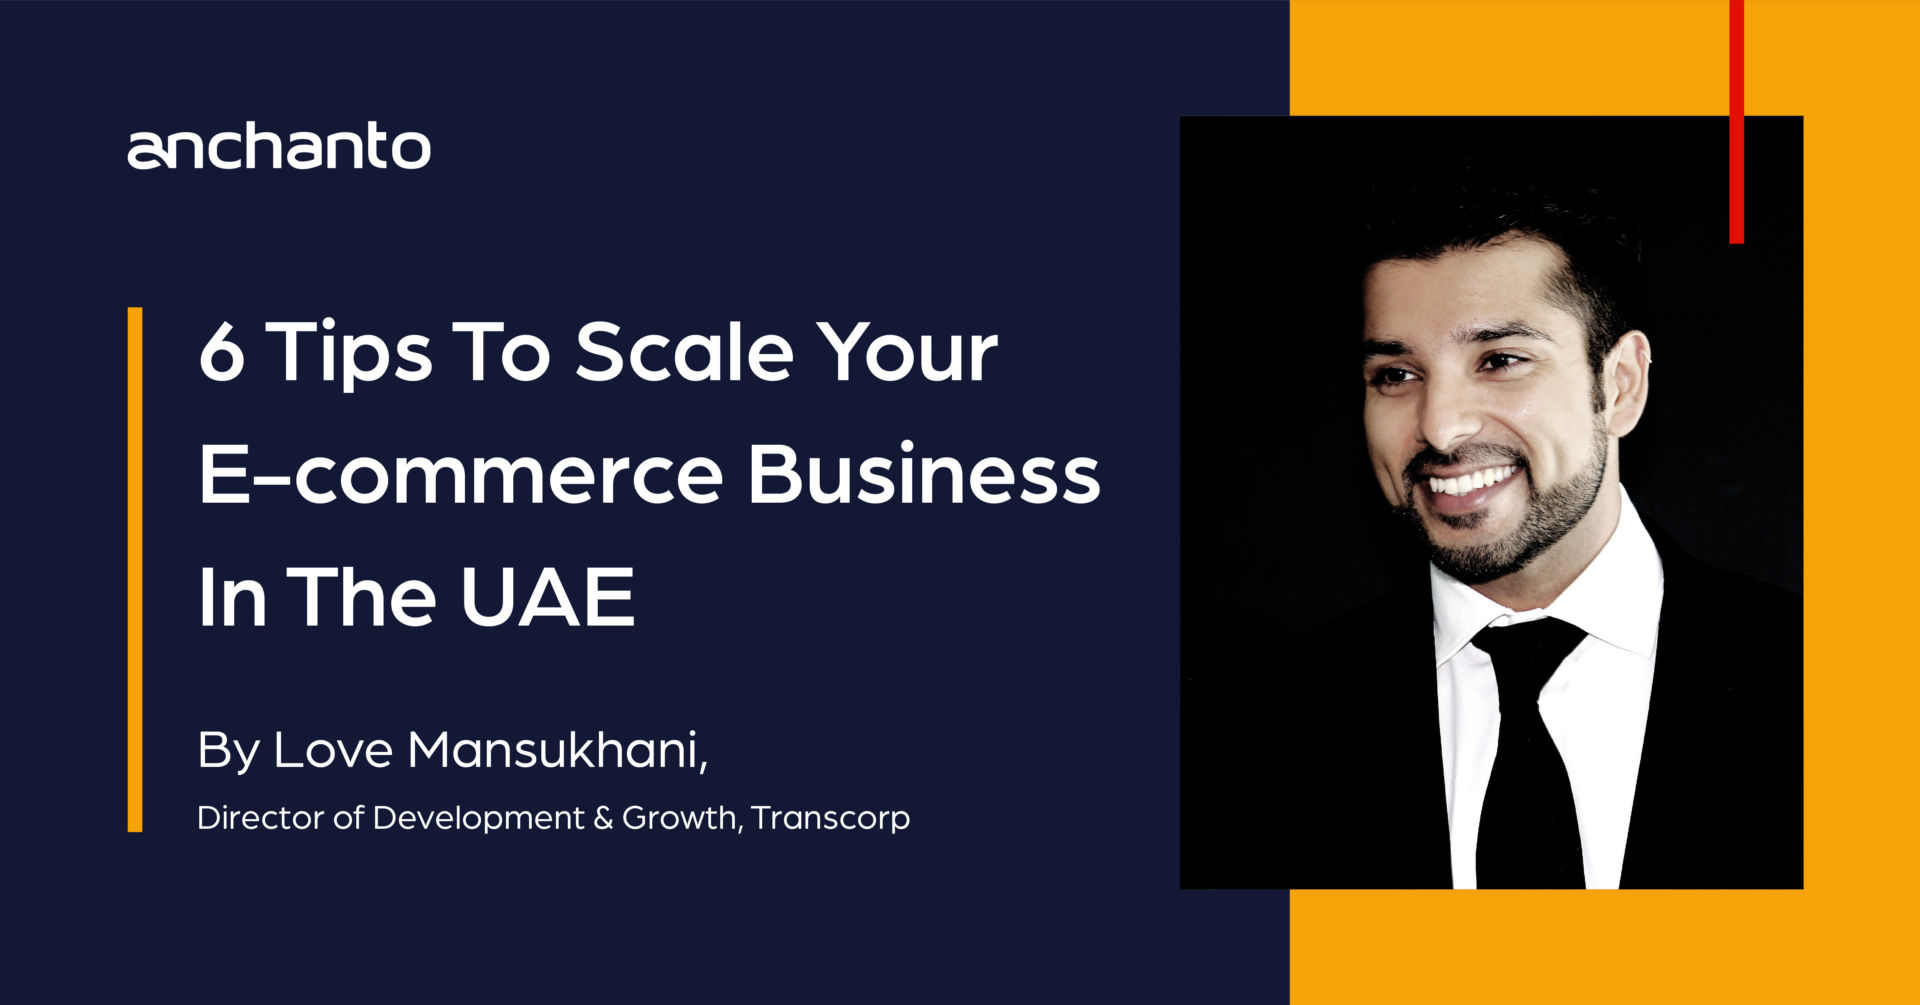 6 Tips To Scale Your E-commerce Business In The UAE